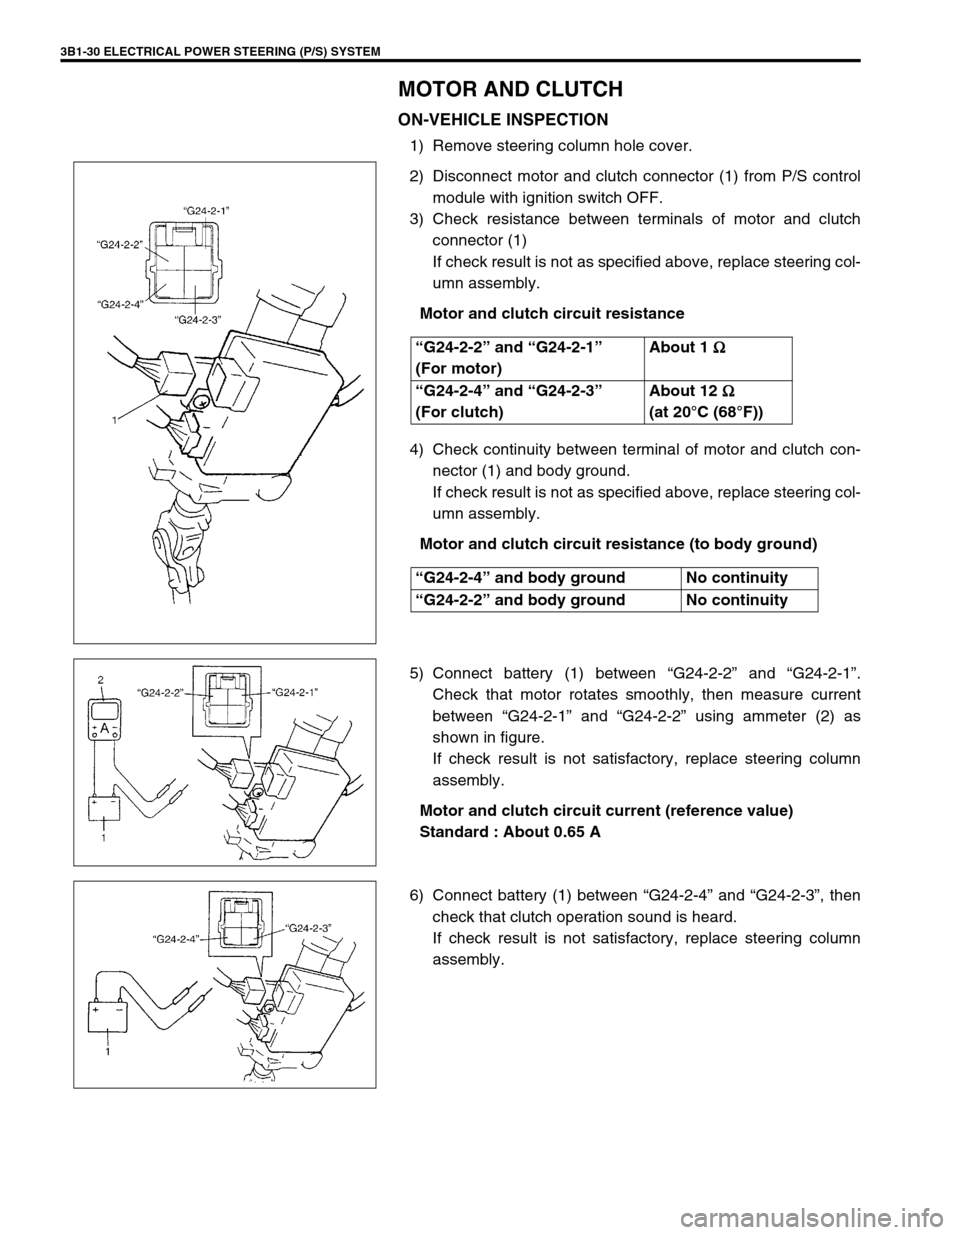 SUZUKI SWIFT 2000 1.G RG413 Service Workshop Manual 3B1-30 ELECTRICAL POWER STEERING (P/S) SYSTEM
MOTOR AND CLUTCH
ON-VEHICLE INSPECTION
1) Remove steering column hole cover.
2) Disconnect motor and clutch connector (1) from P/S control
module with ign